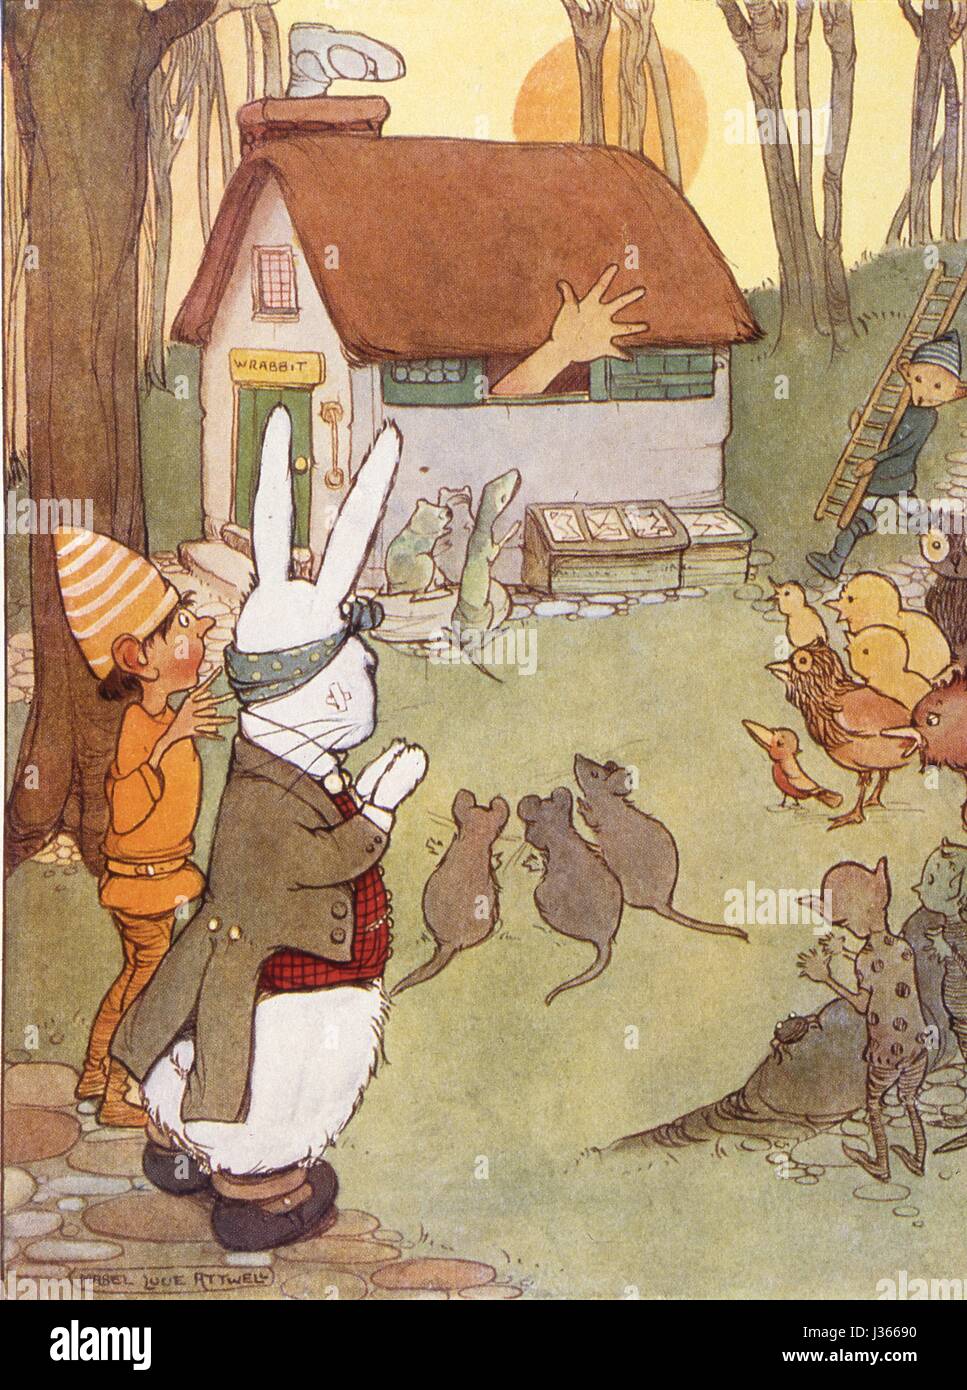 Illustration by Mabel Lucie Attwell  Alice in Wonderland, by Lewis Carroll  London, Raphael Tuck, 1910.    The White Rabbit's house. Stock Photo